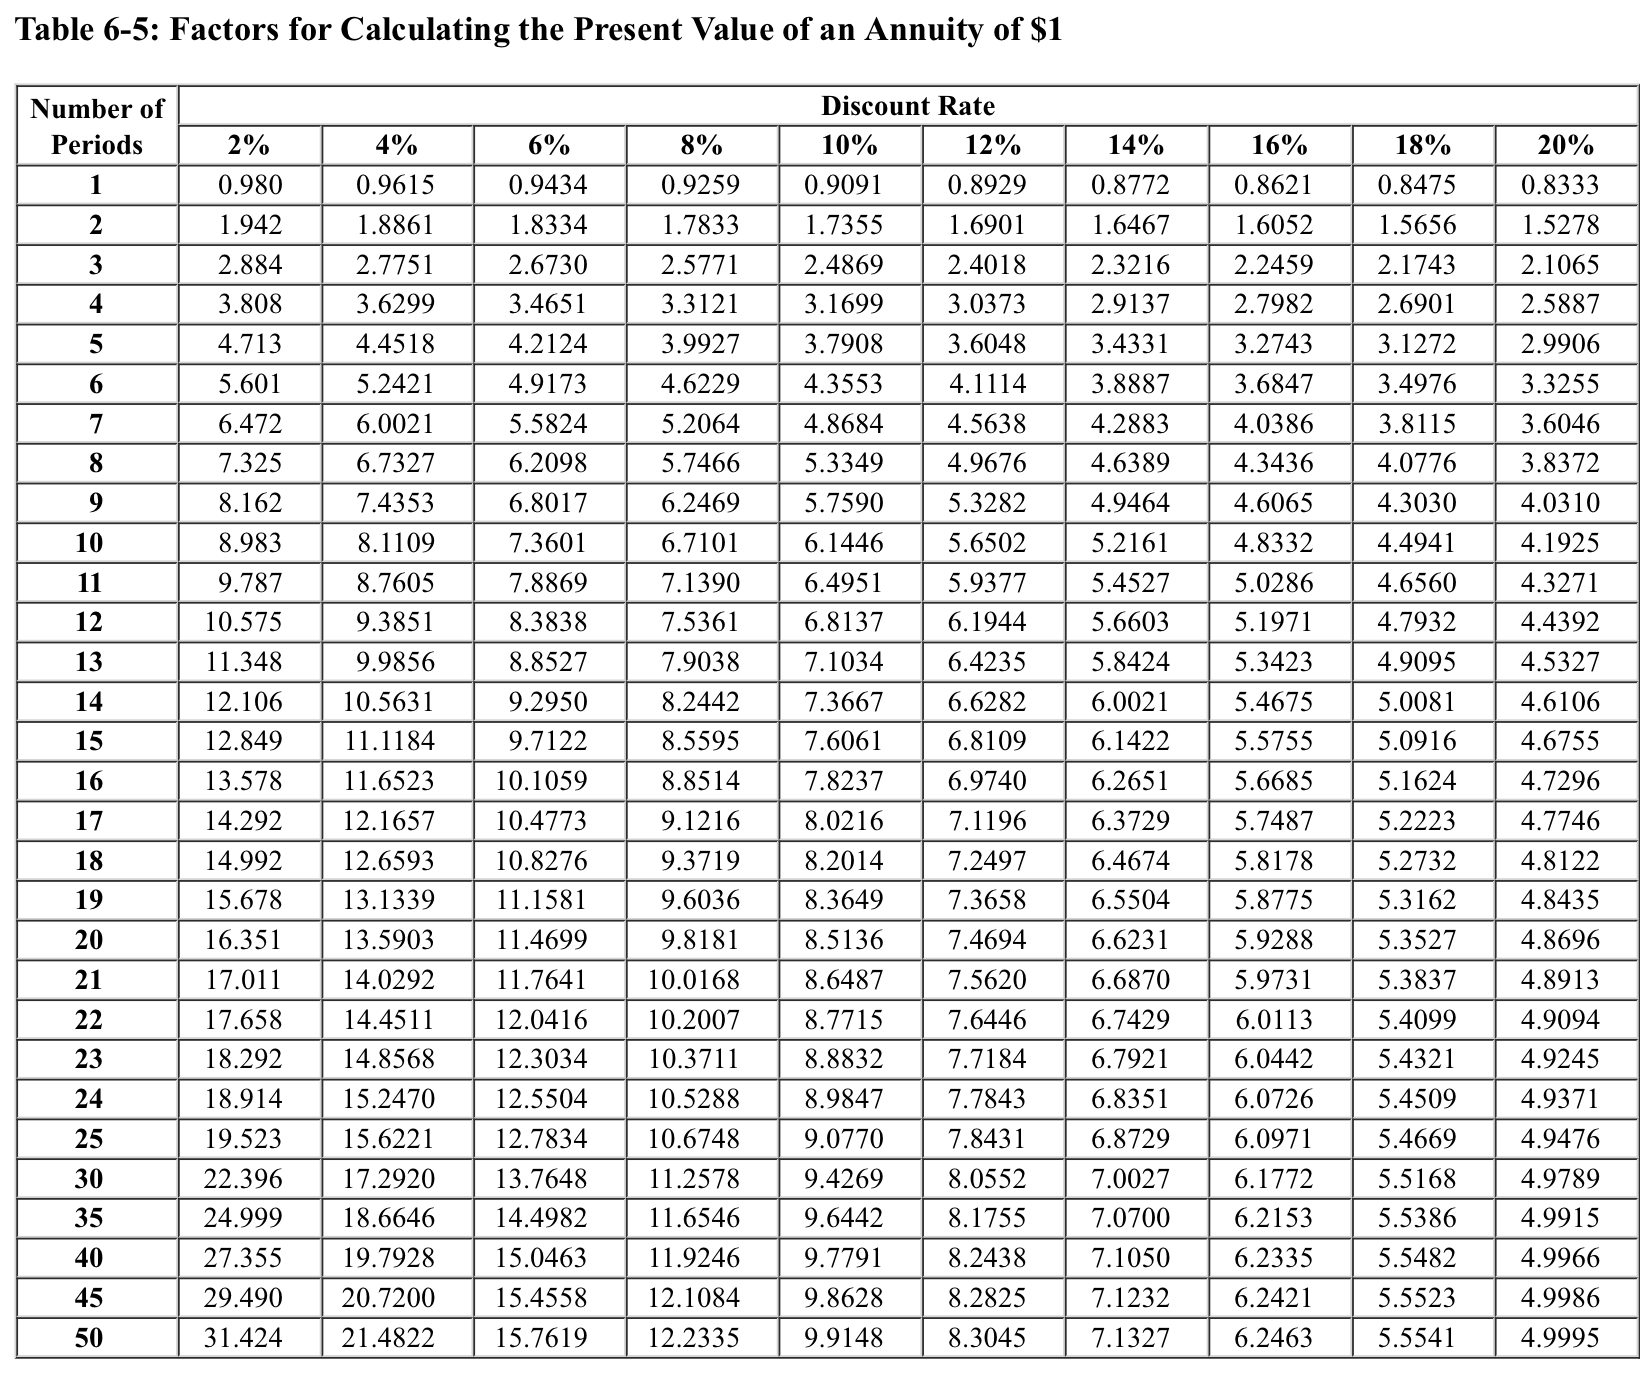 Table 6-5: Factors for Calculating the Present Value of an Annuity of $1 Number of Periods 1 2 3 4 5 6 7 9 10